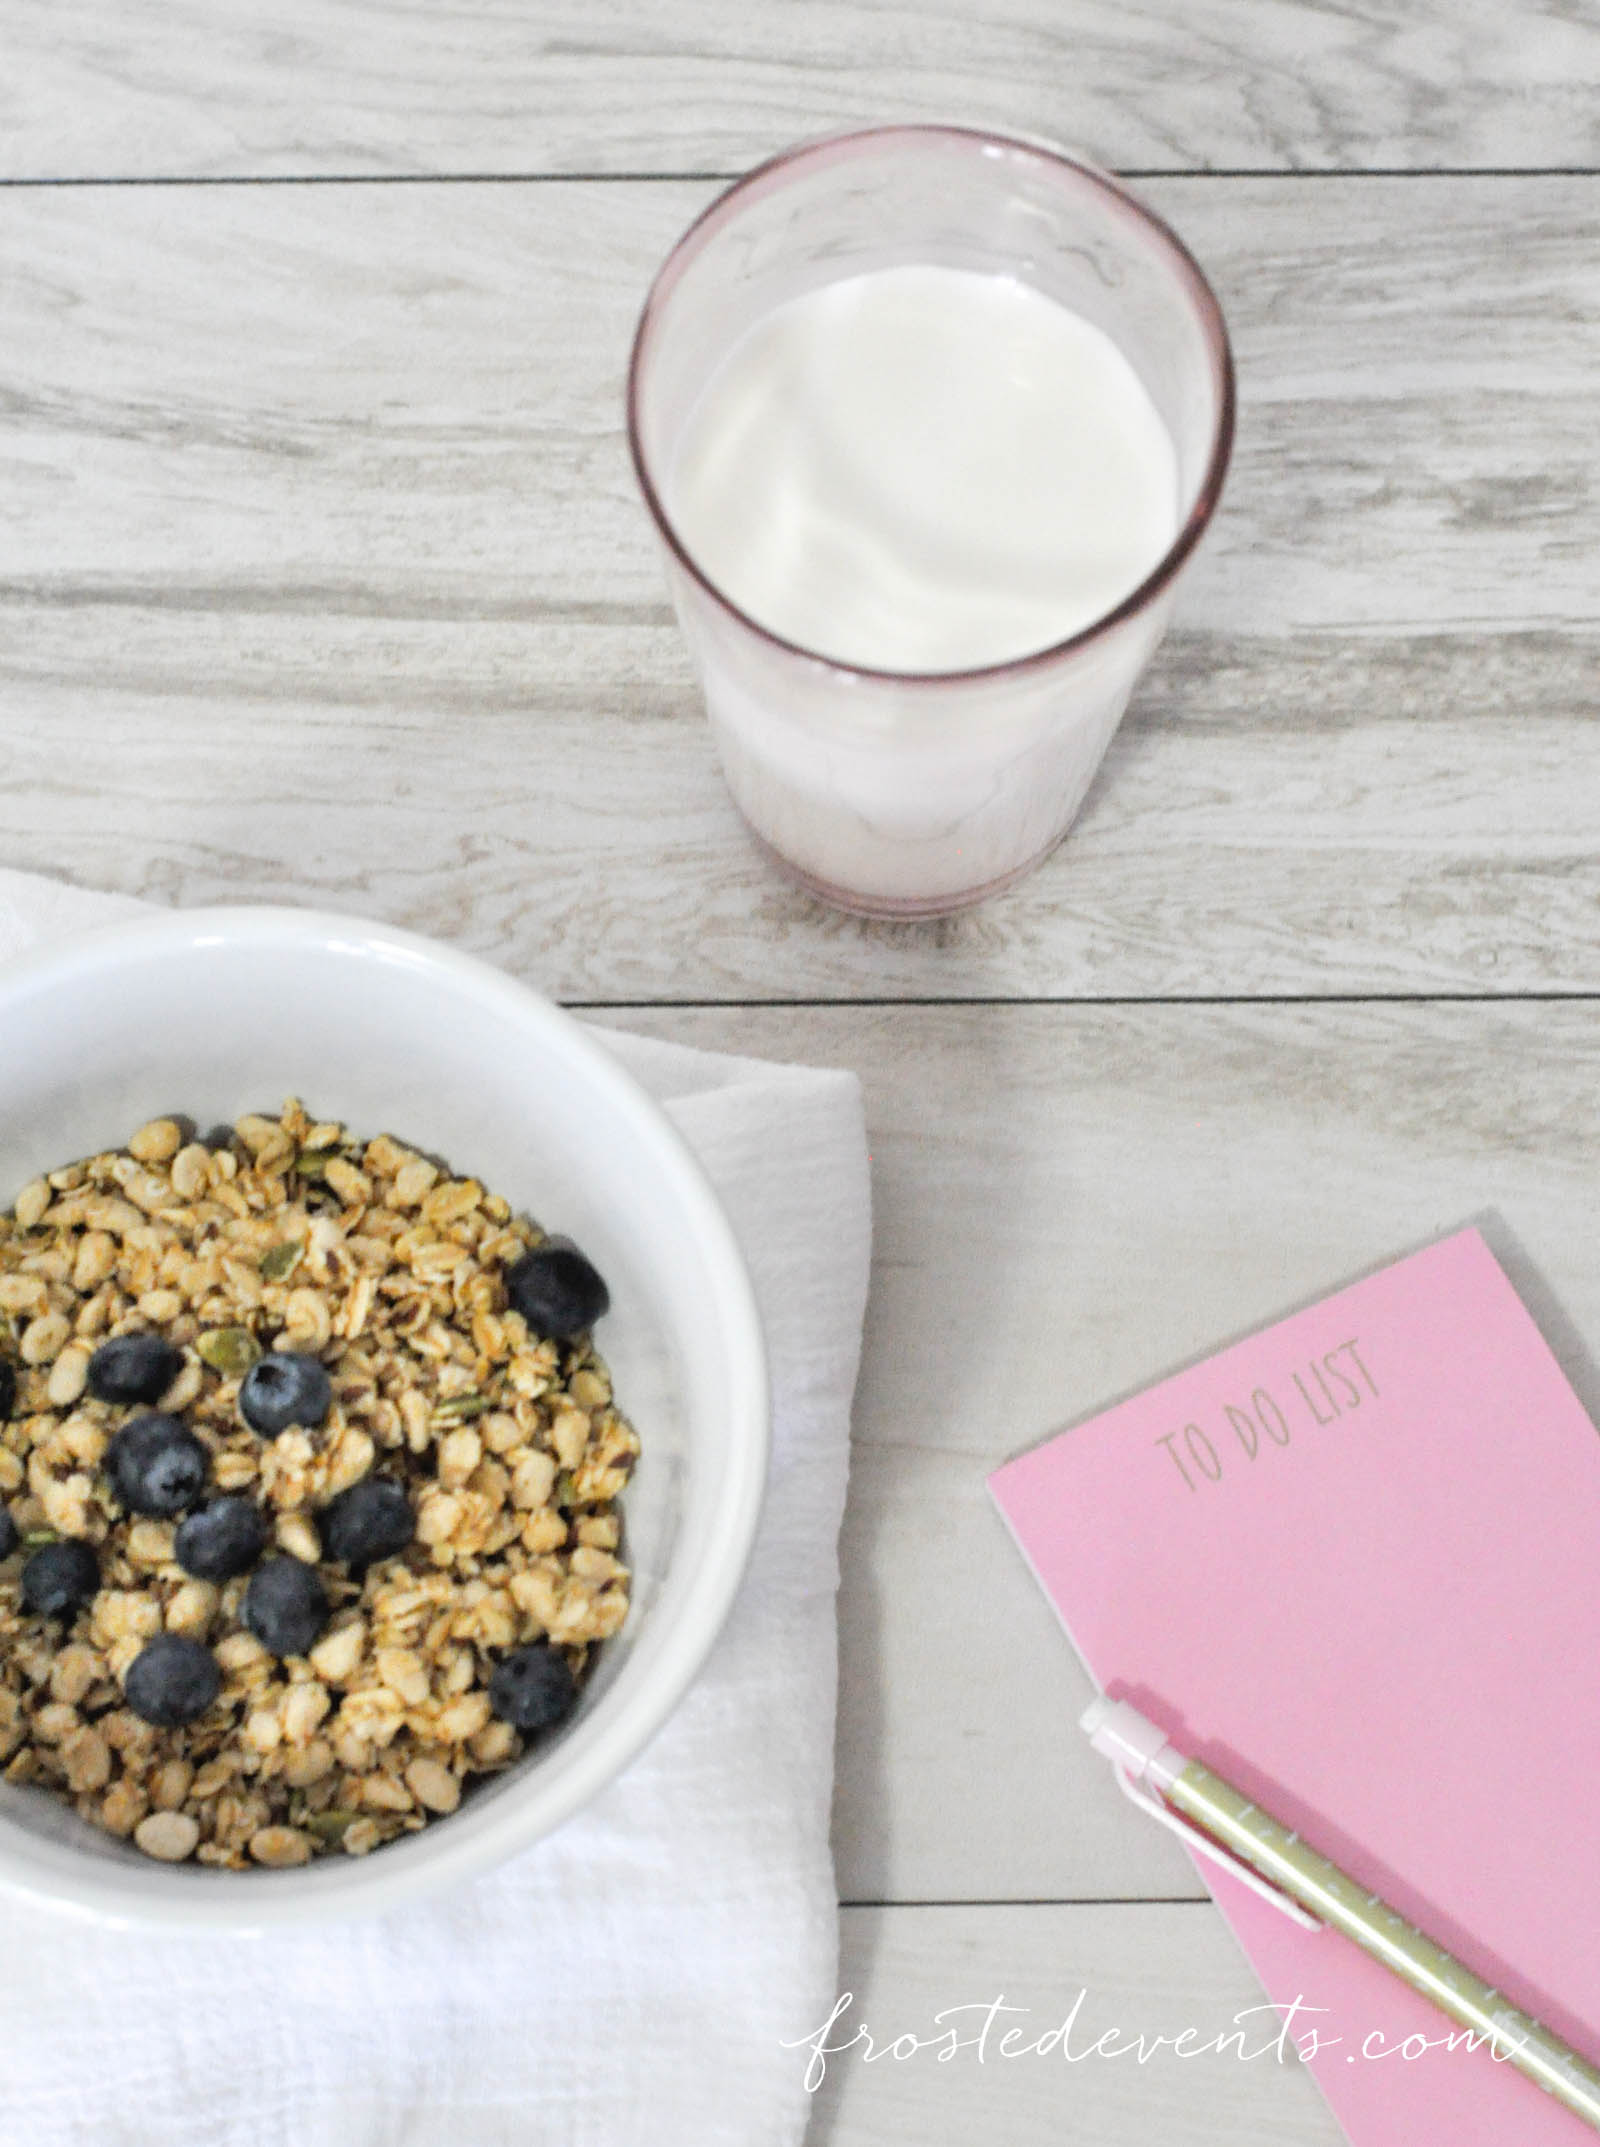 A Protein Rich Breakfast Plus Fitbit Giveaway Drink Milk in the Morning for More Energy